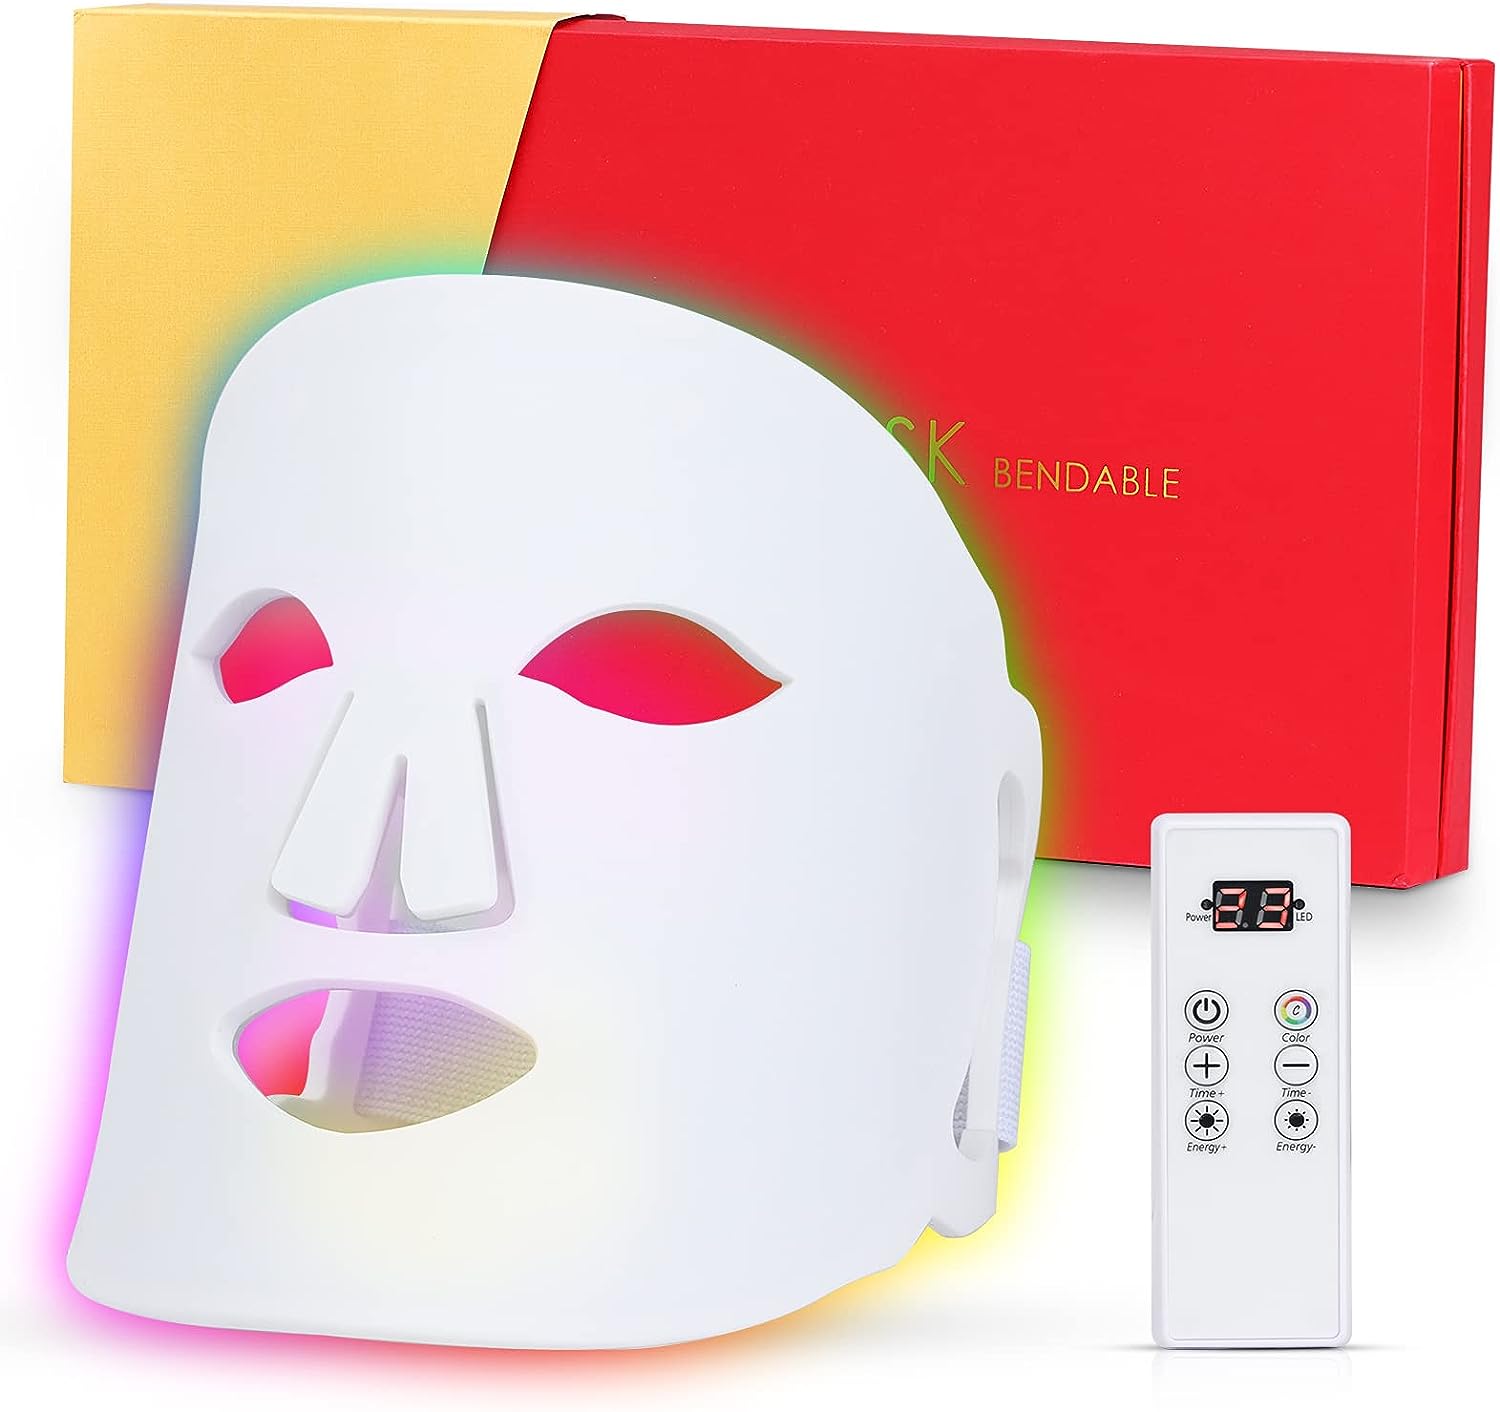 laf-bktt-led-face-mask-light-therapy-red-light-therapy-for-face-7-colors-skin-care-mask-for-face-and-neck-at-home